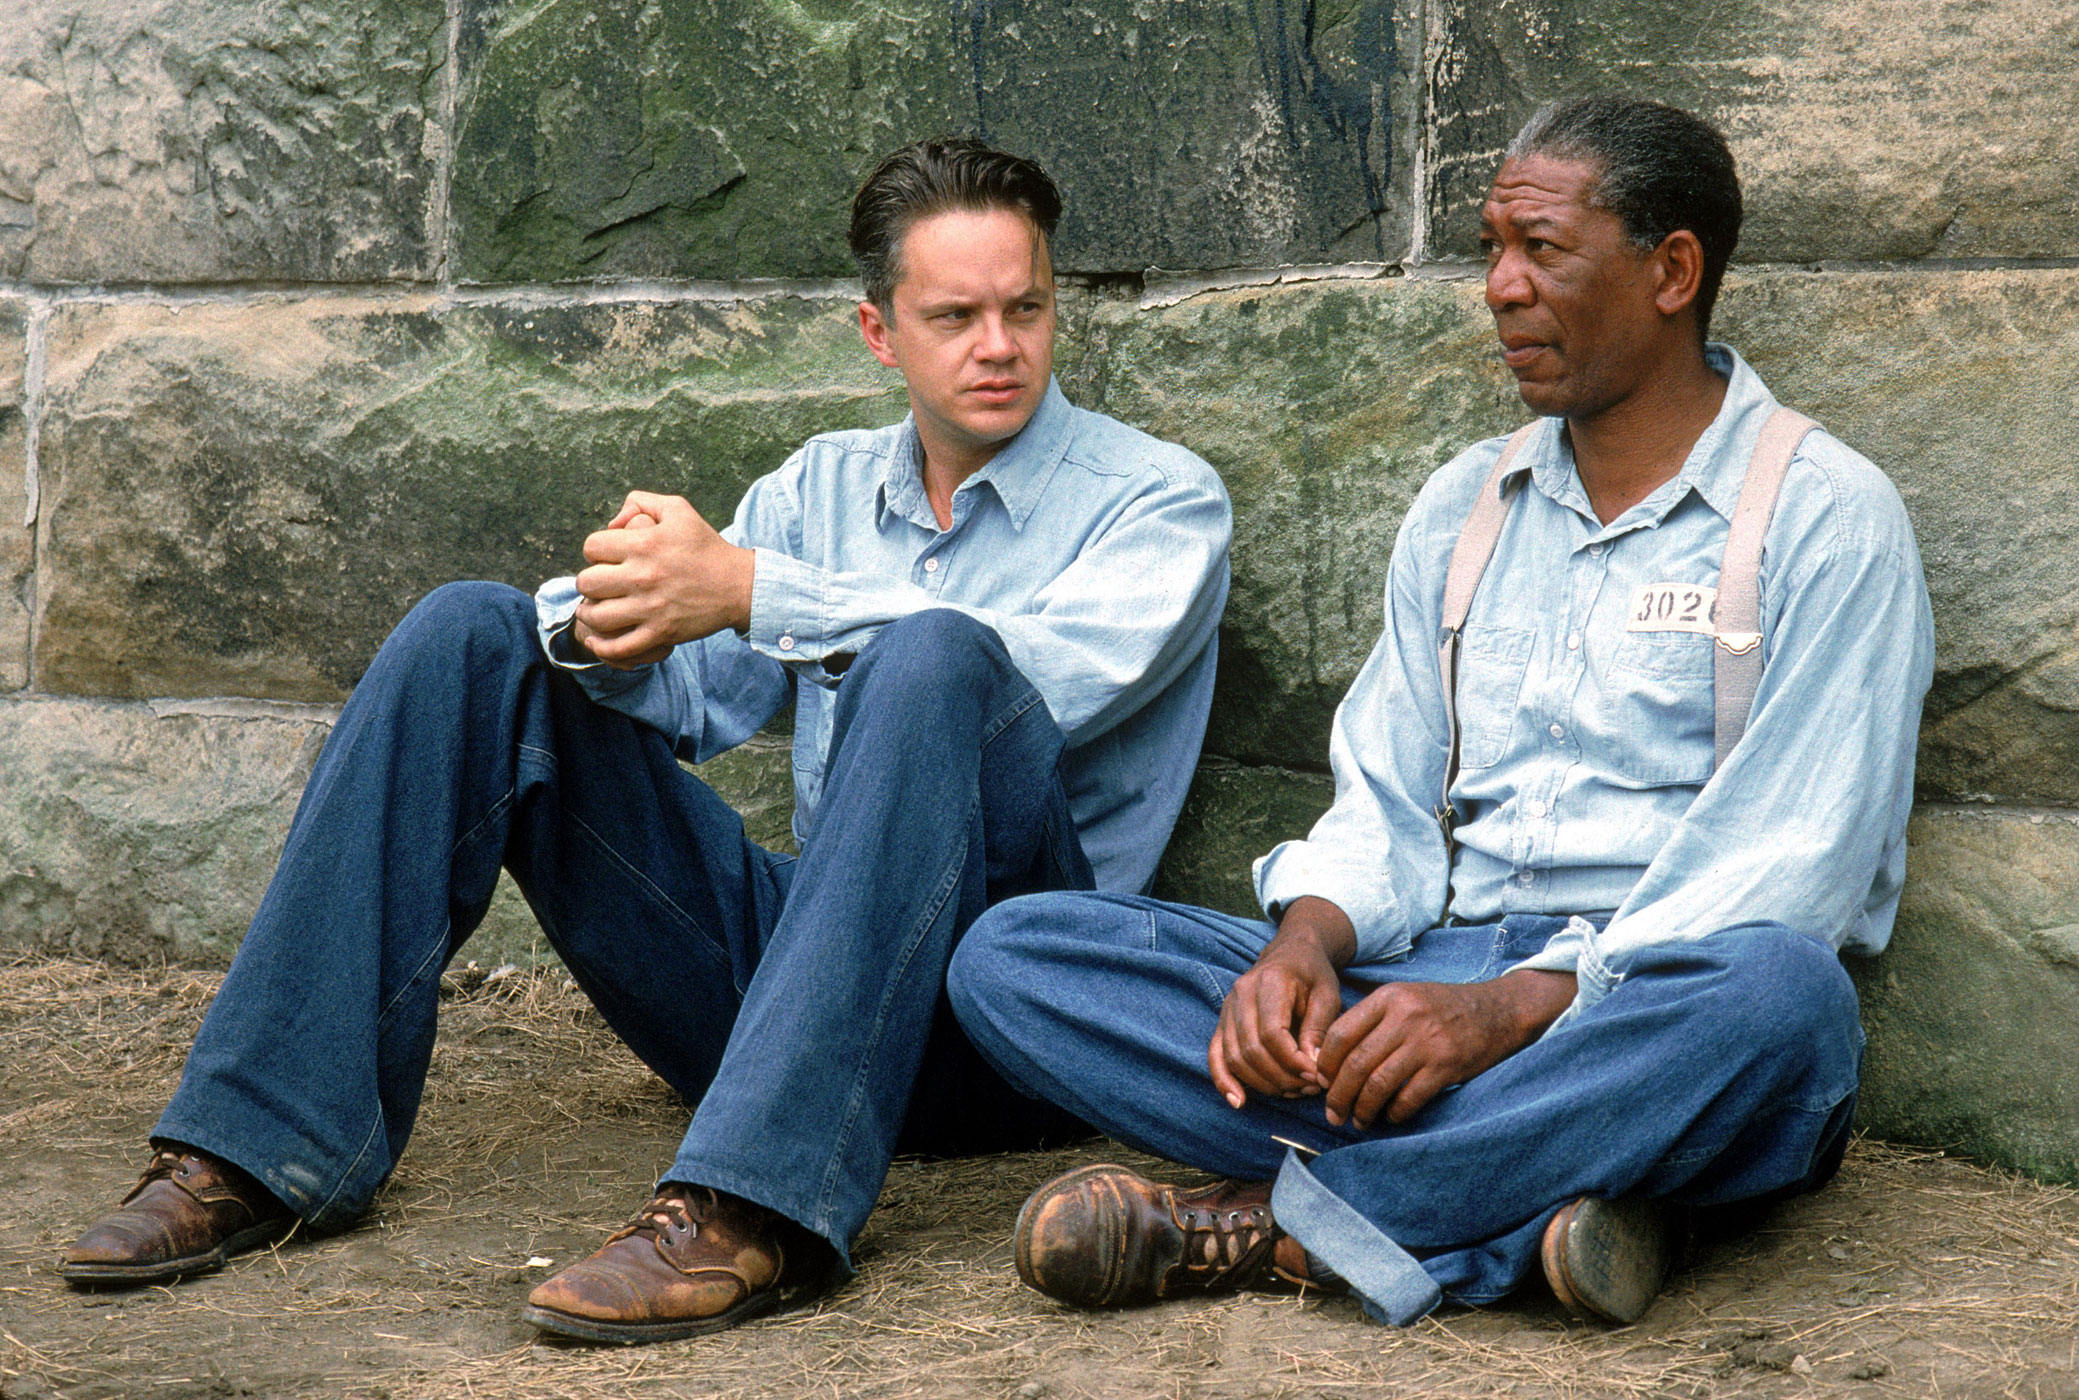 The film is based on a Stephen King short story called  Rita Hayworth and Shawshank Redemption,  which was published in the book Different Seasons. Other stories in that collection included the stories later made into the films Stand By Me and Apt Pupil.